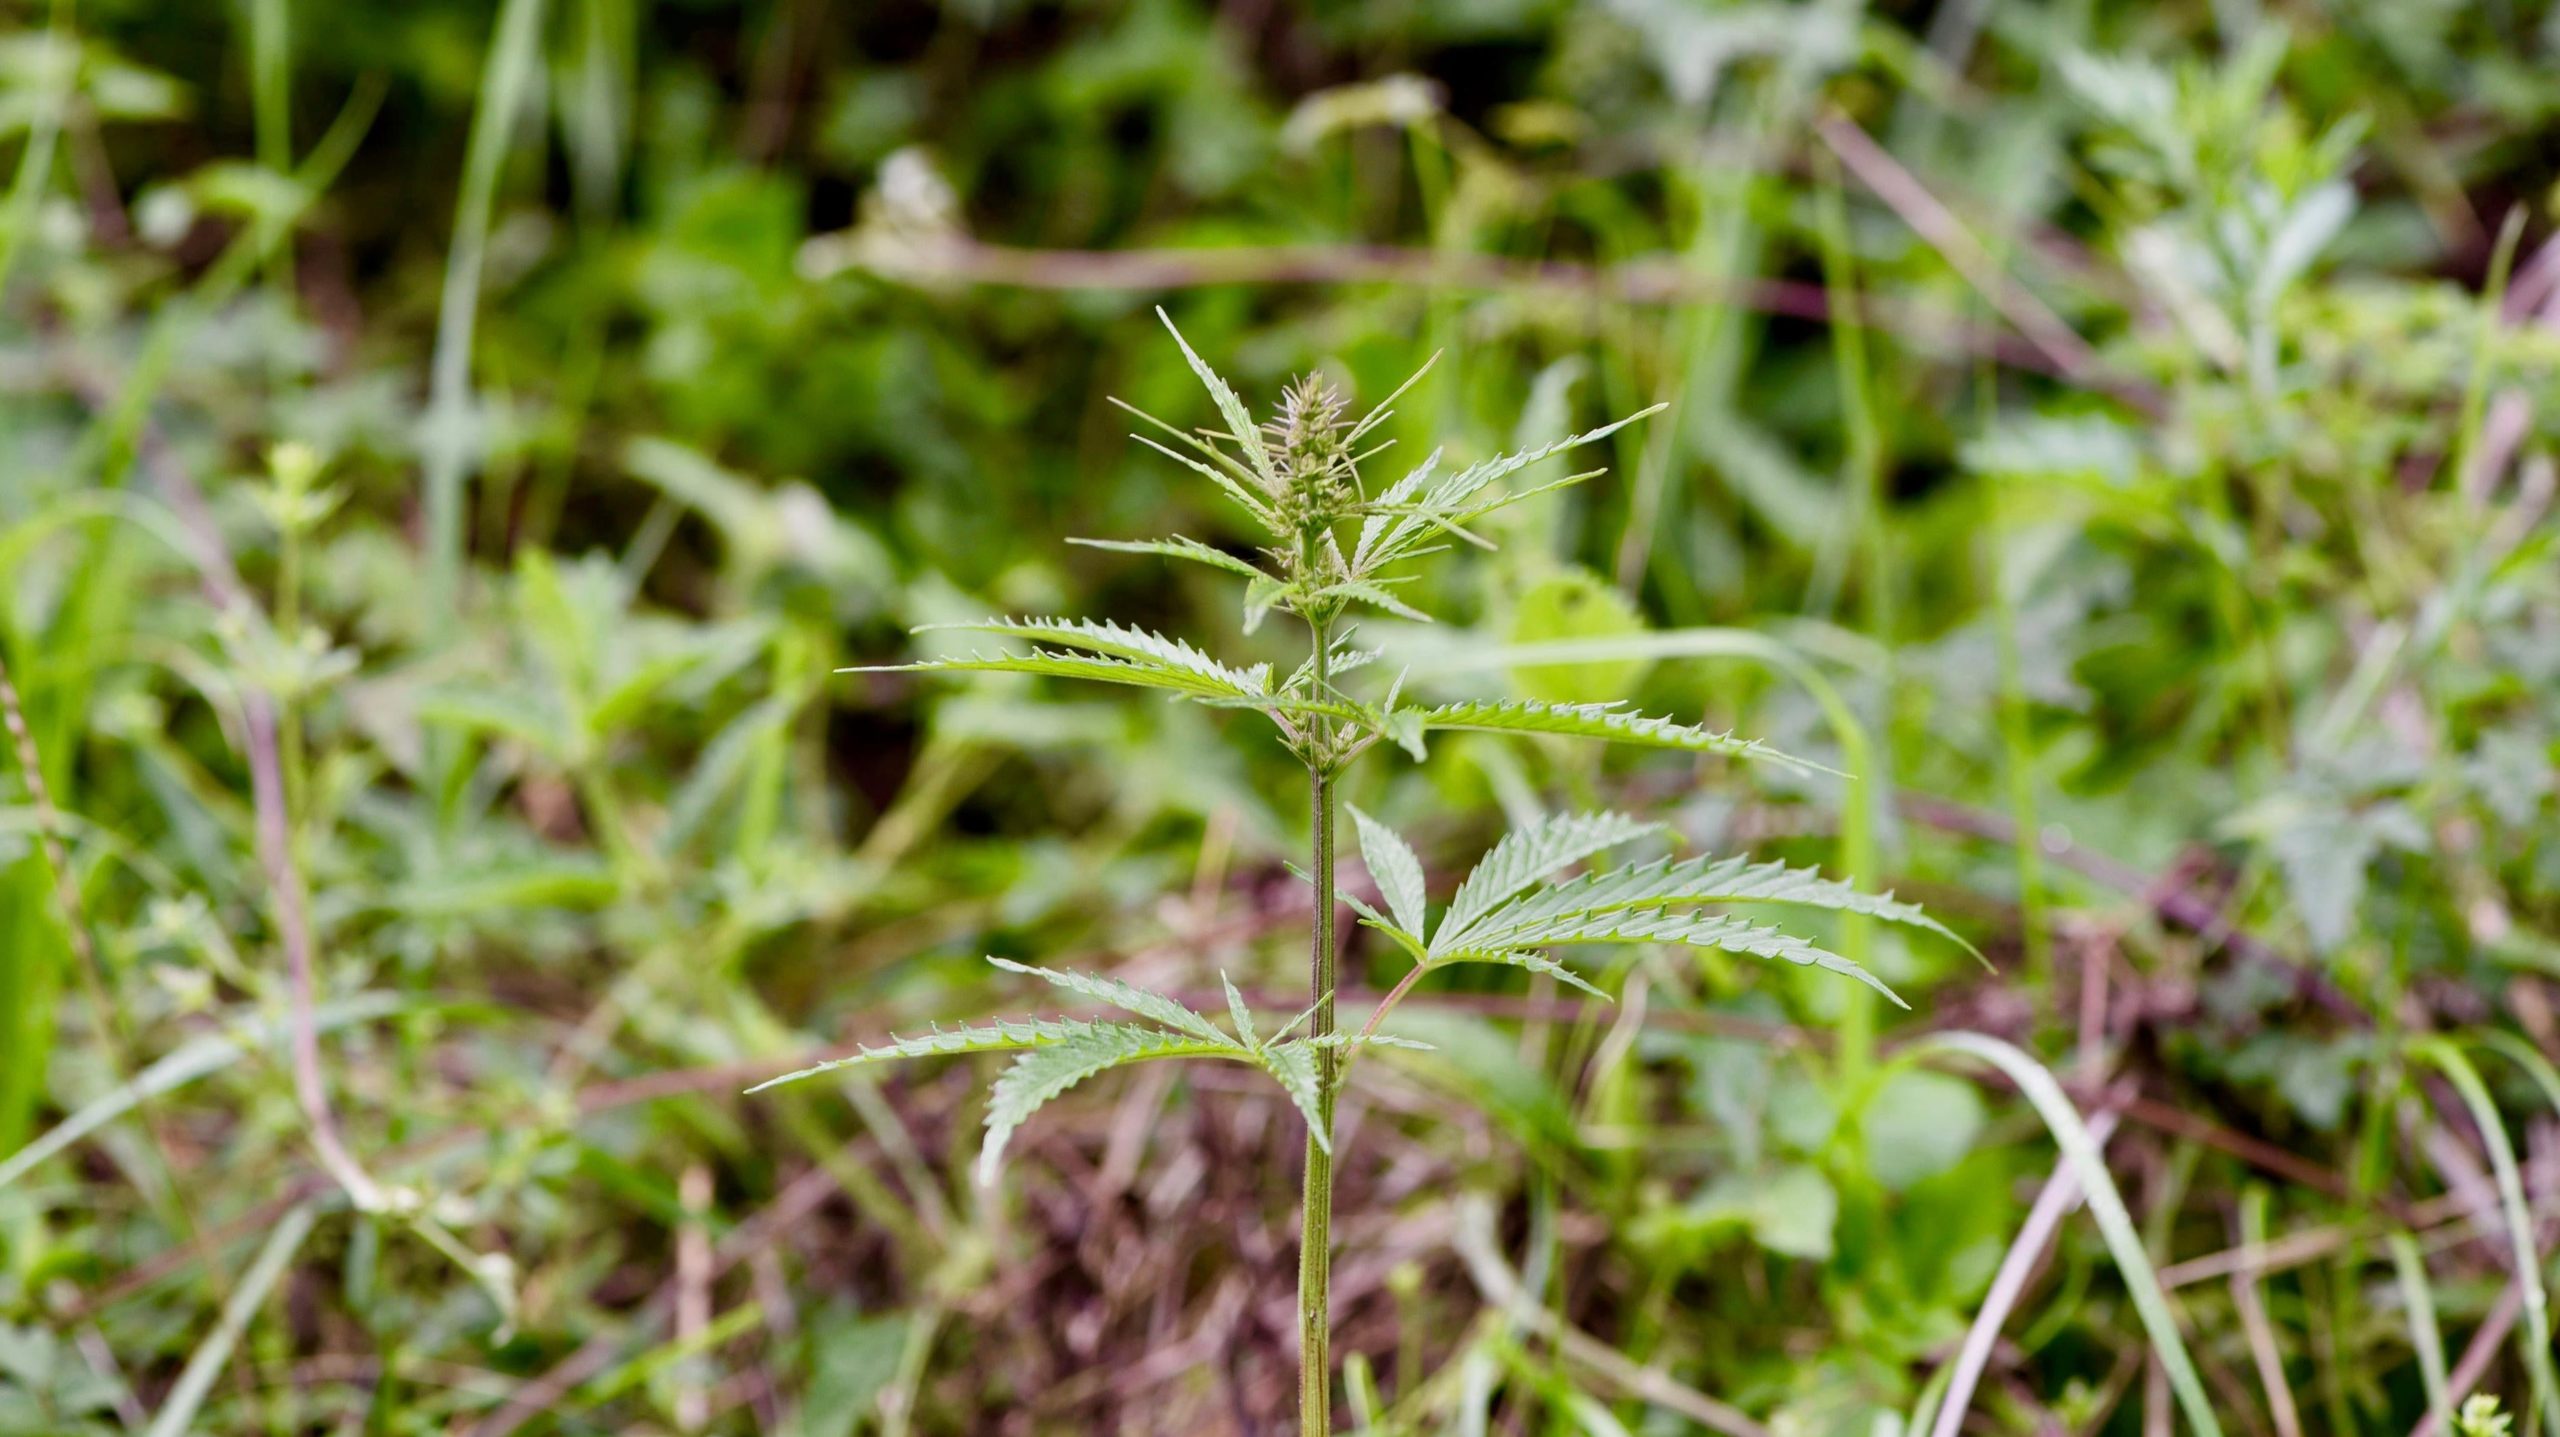 A feral cannabis plant in a central Chinese grassland. (Image: Guangpeng Ren)